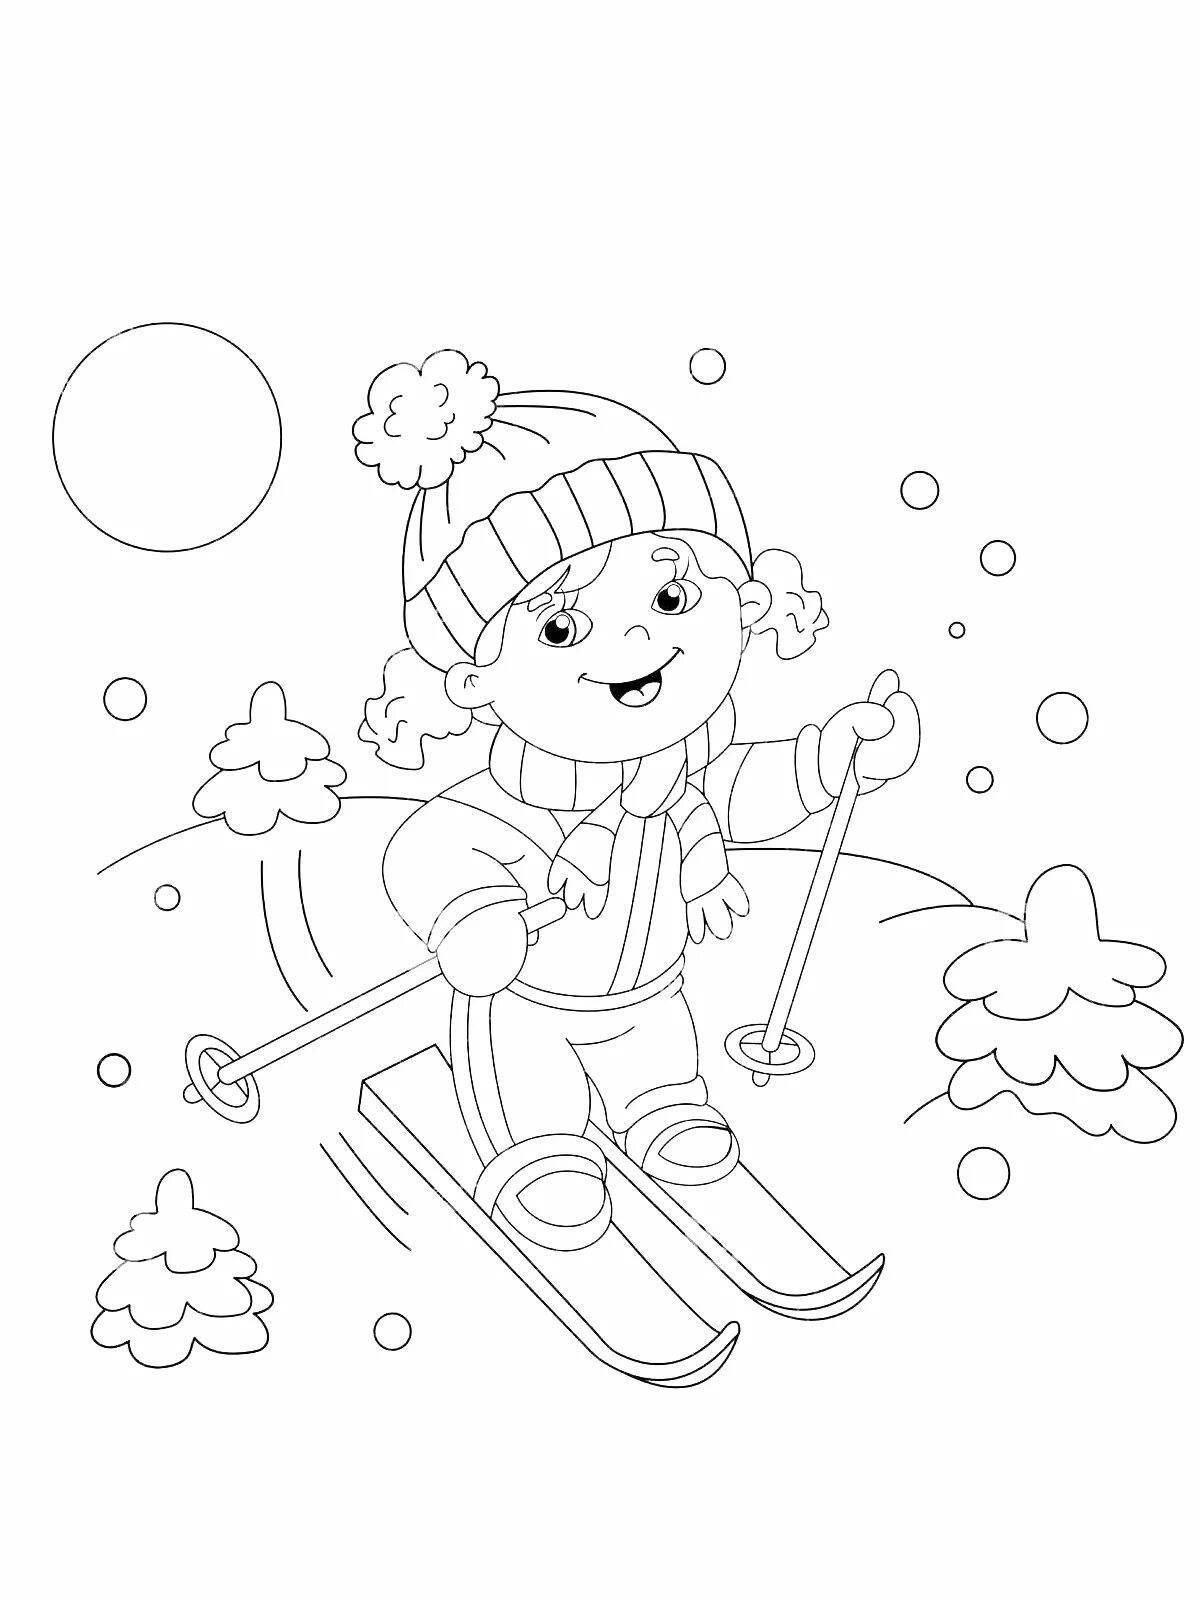 Glitter winter sports coloring pages for preschoolers